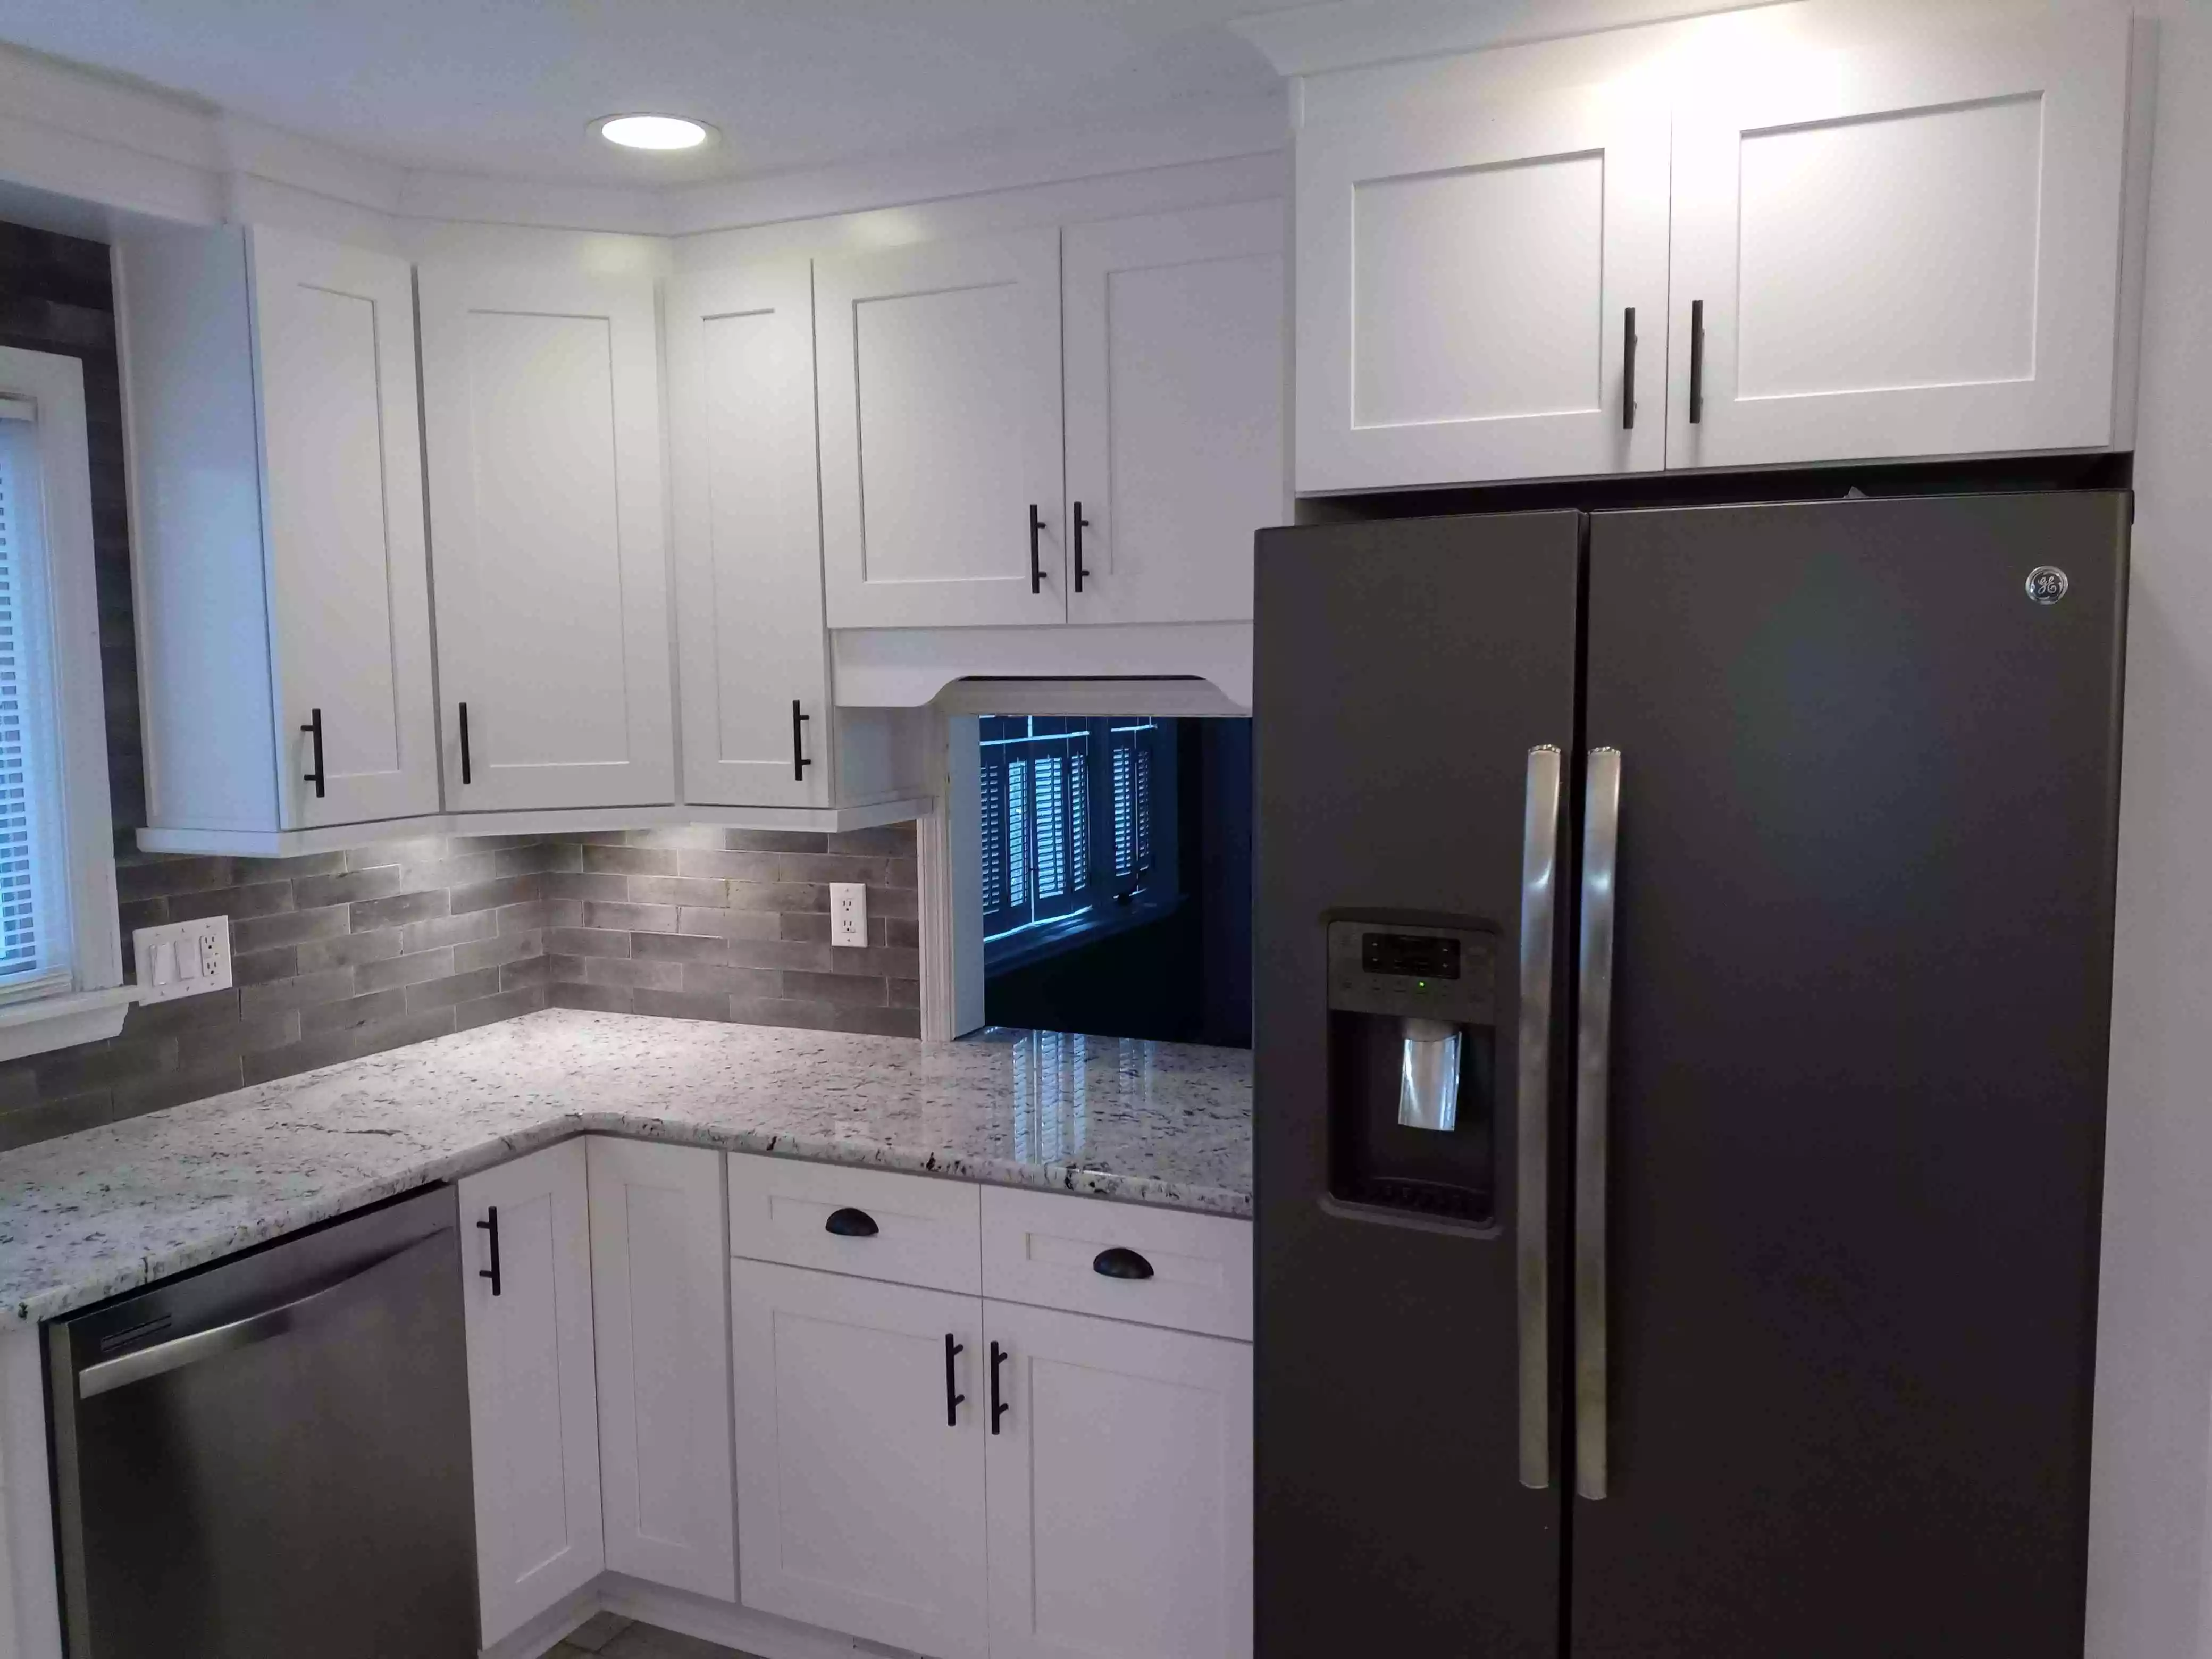 Dove white shaker custom cabinets with silver appliances